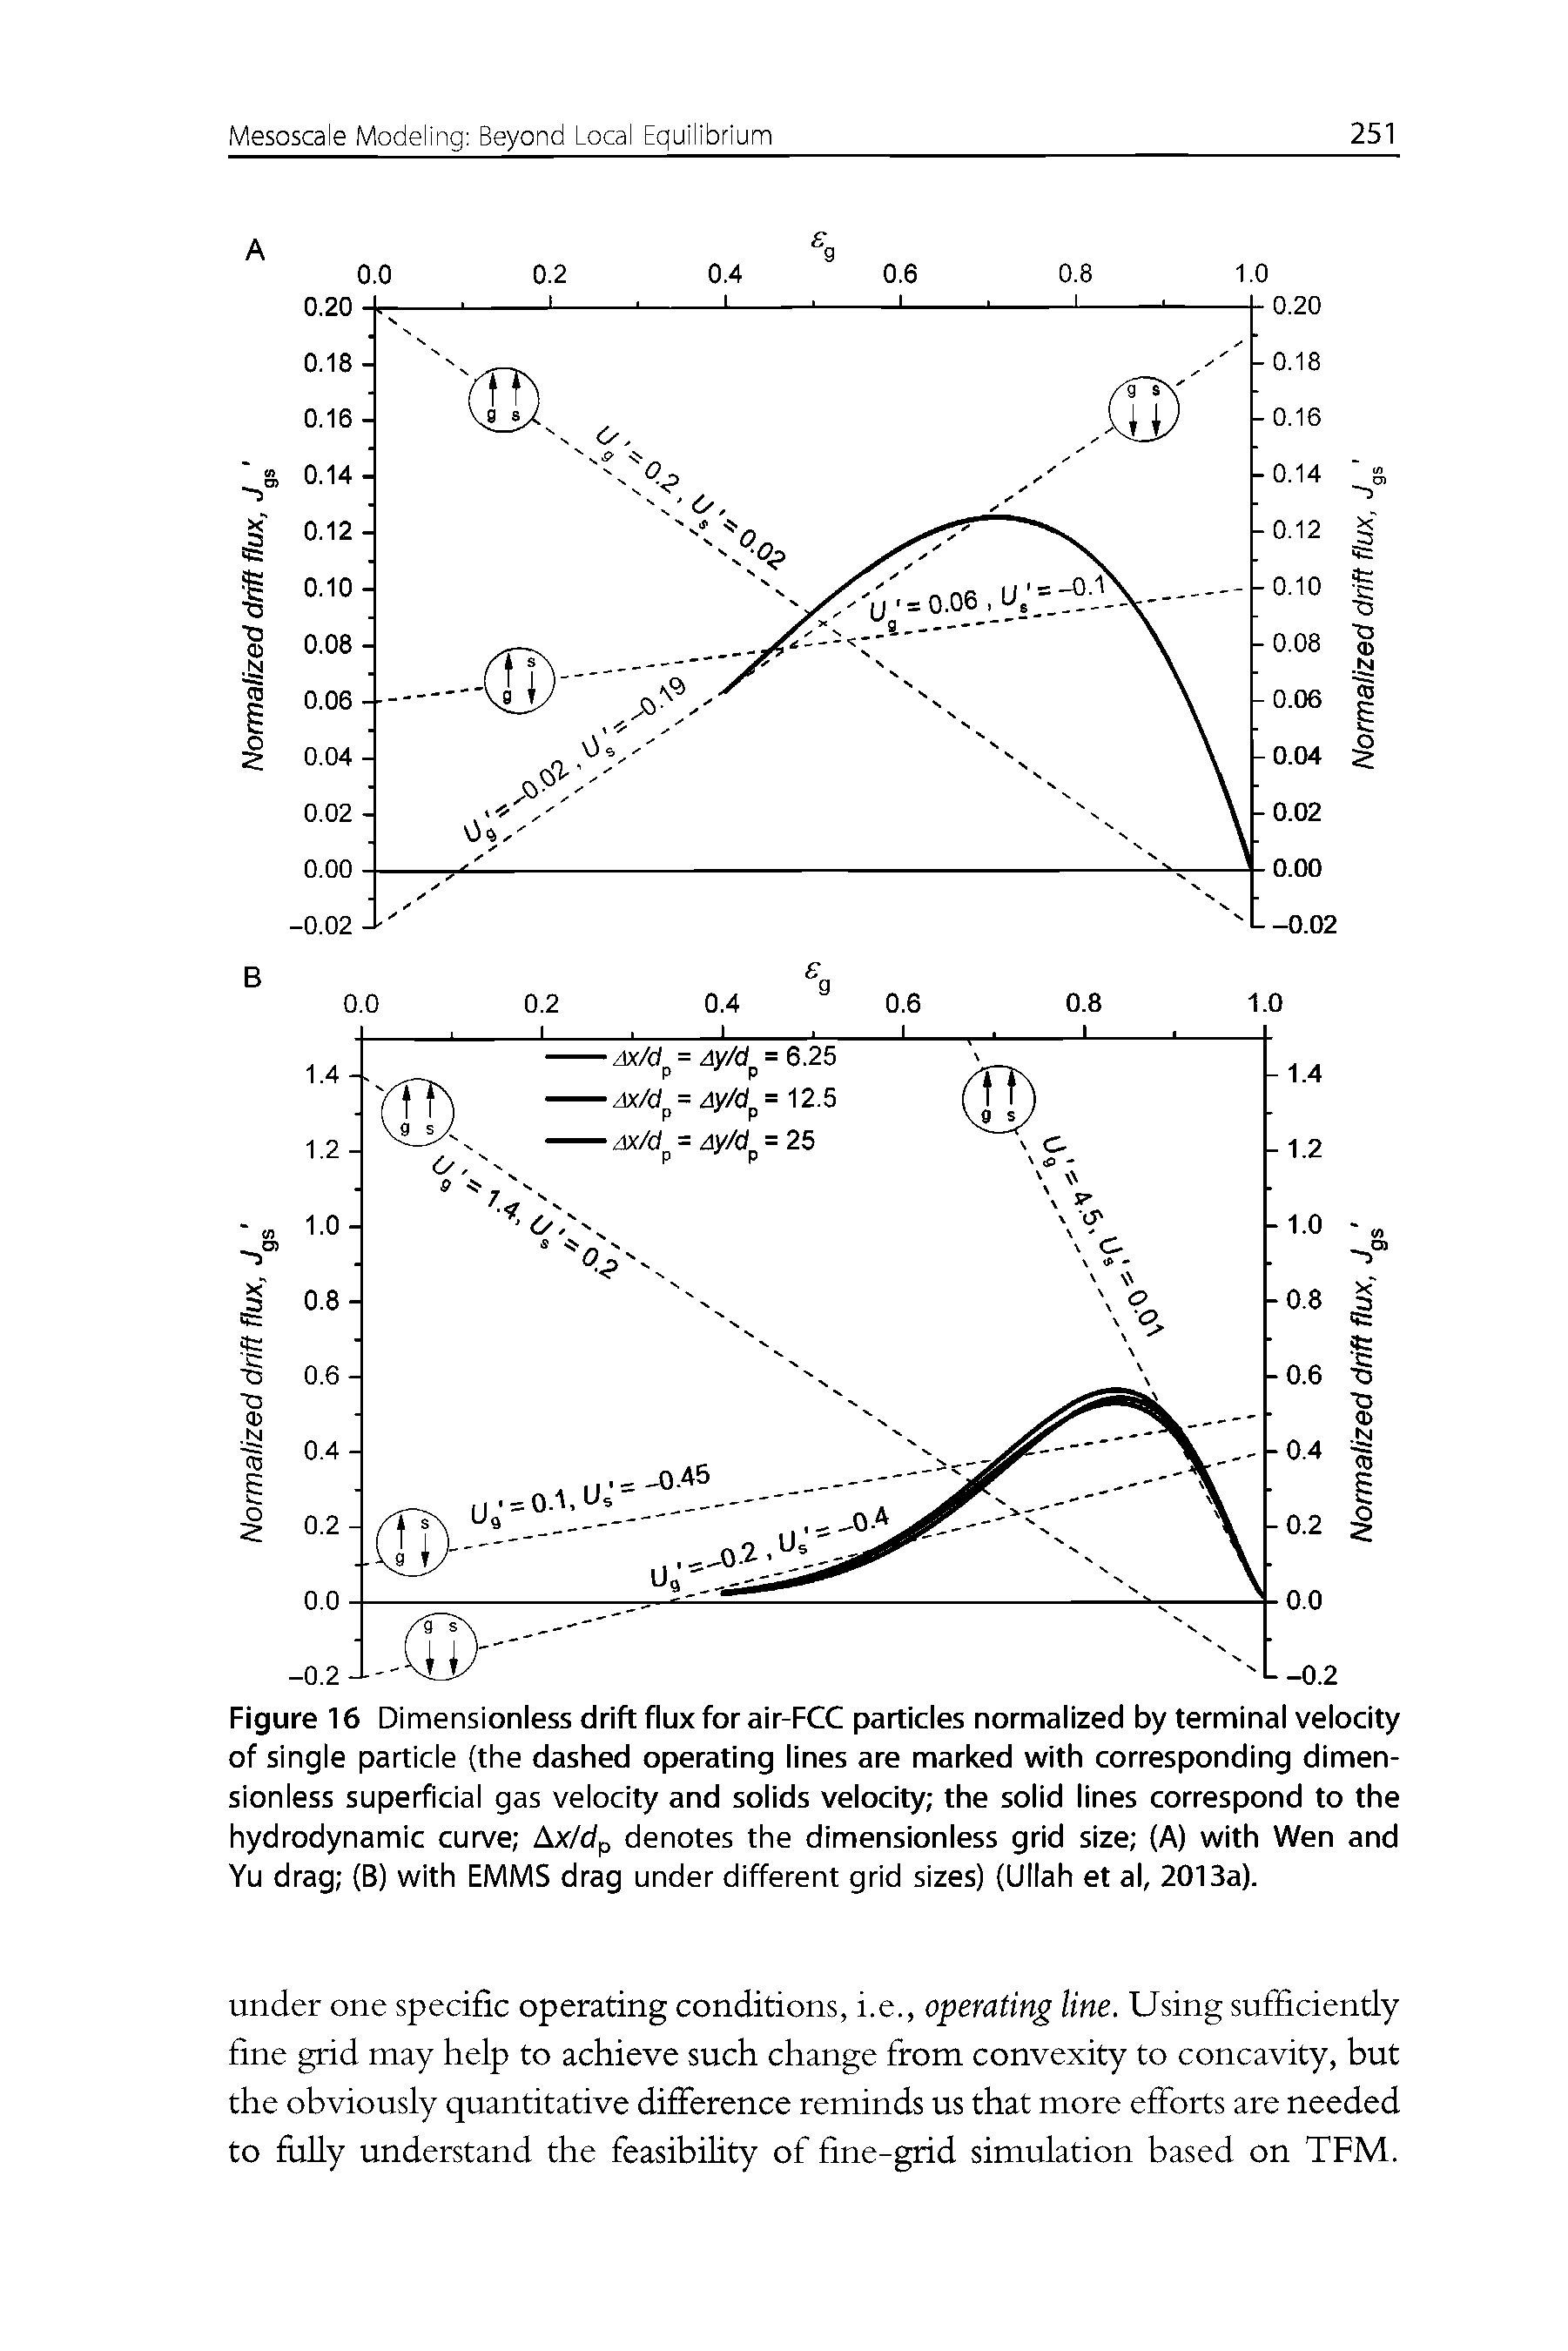 Figure 16 Dimensionless drift flux for air-FCC particles normalized by terminal velocity of single particle (the dashed operating lines are marked with corresponding dimensionless superficial gas velocity and solids velocity the solid lines correspond to the hydrodynamic curve Ax/dp denotes the dimensionless grid size (A) with Wen and Yu drag (B) with EMMS drag under different grid sizes) (Ullah et al, 2013a).